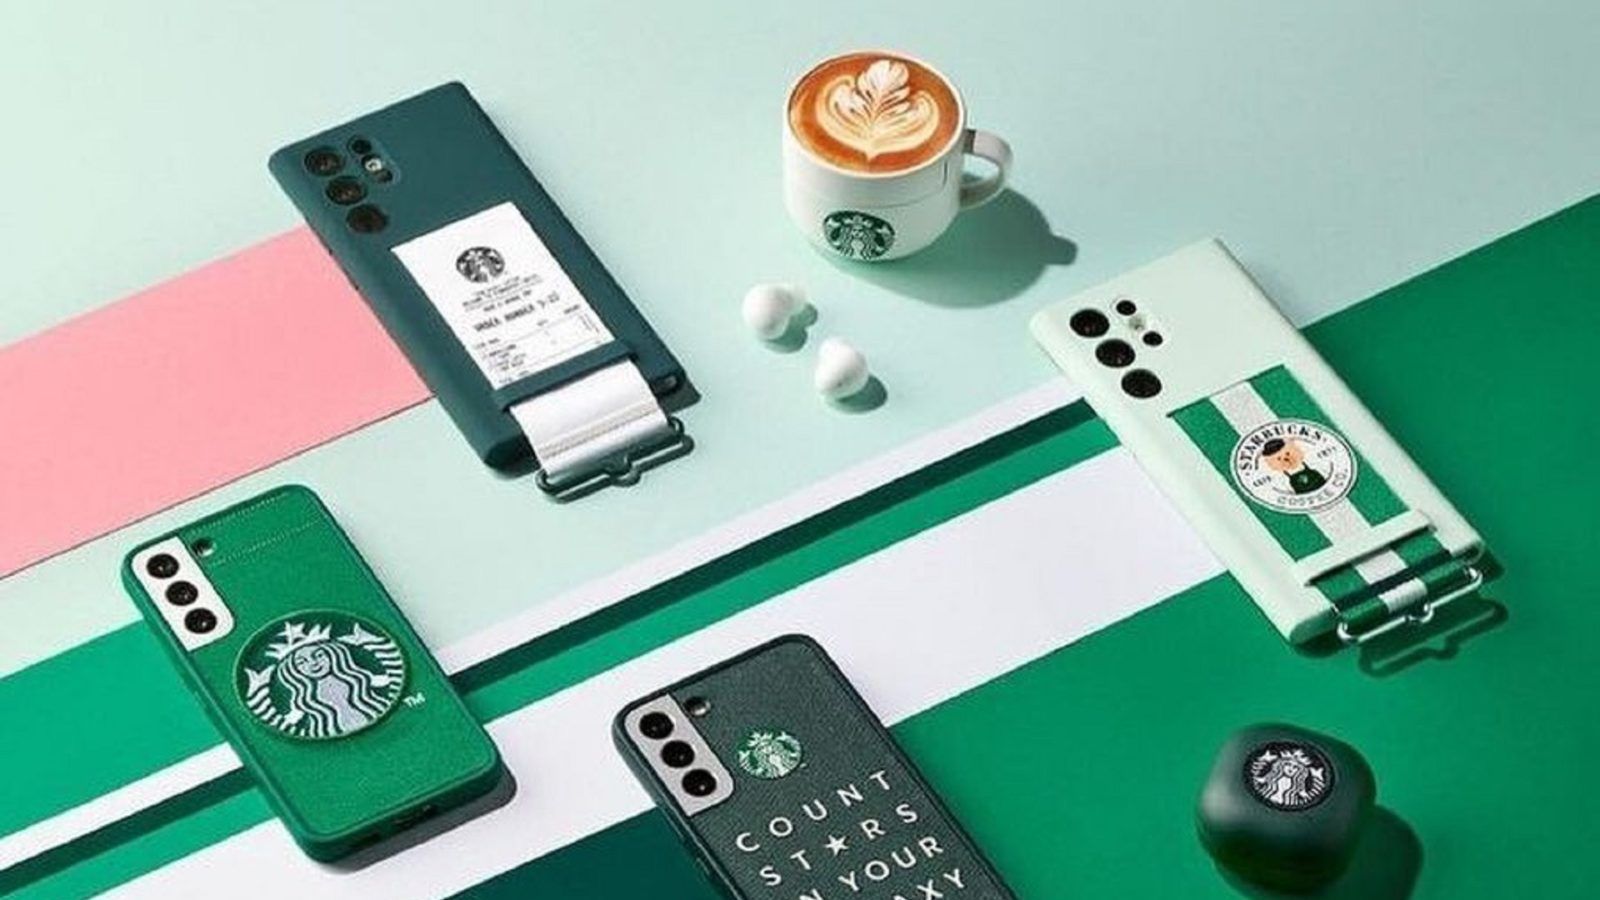 Starbucks and Samsung collaborate for eco-friendly accessories collection